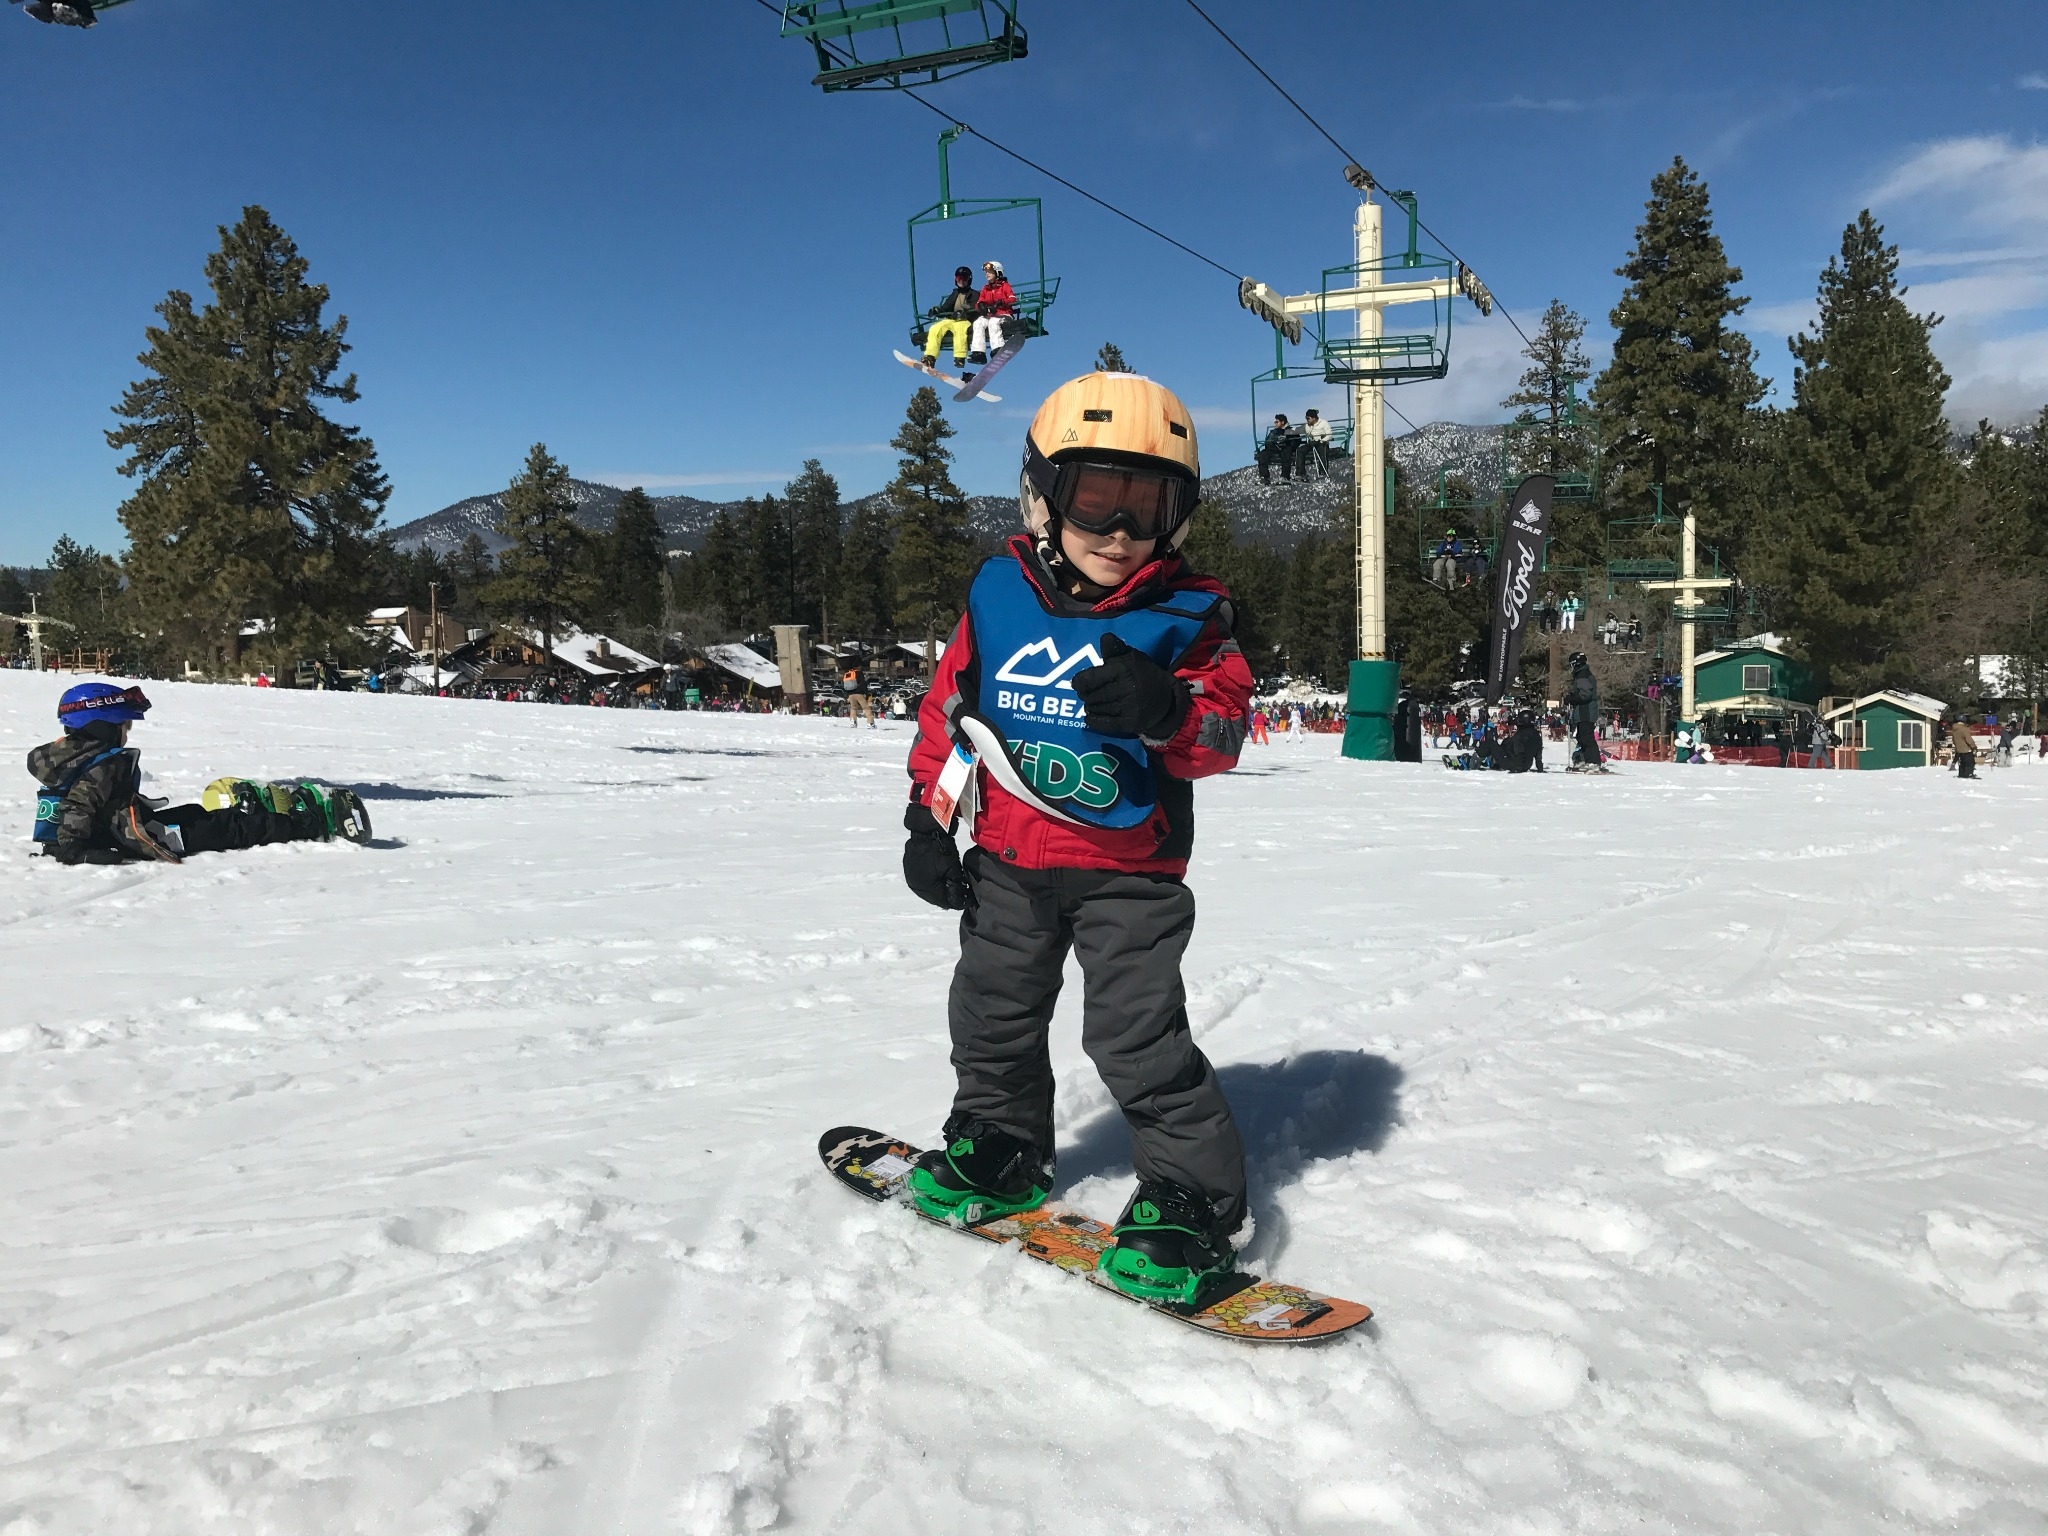 Learn How to Snowboard at Snow Summit on the slopes1